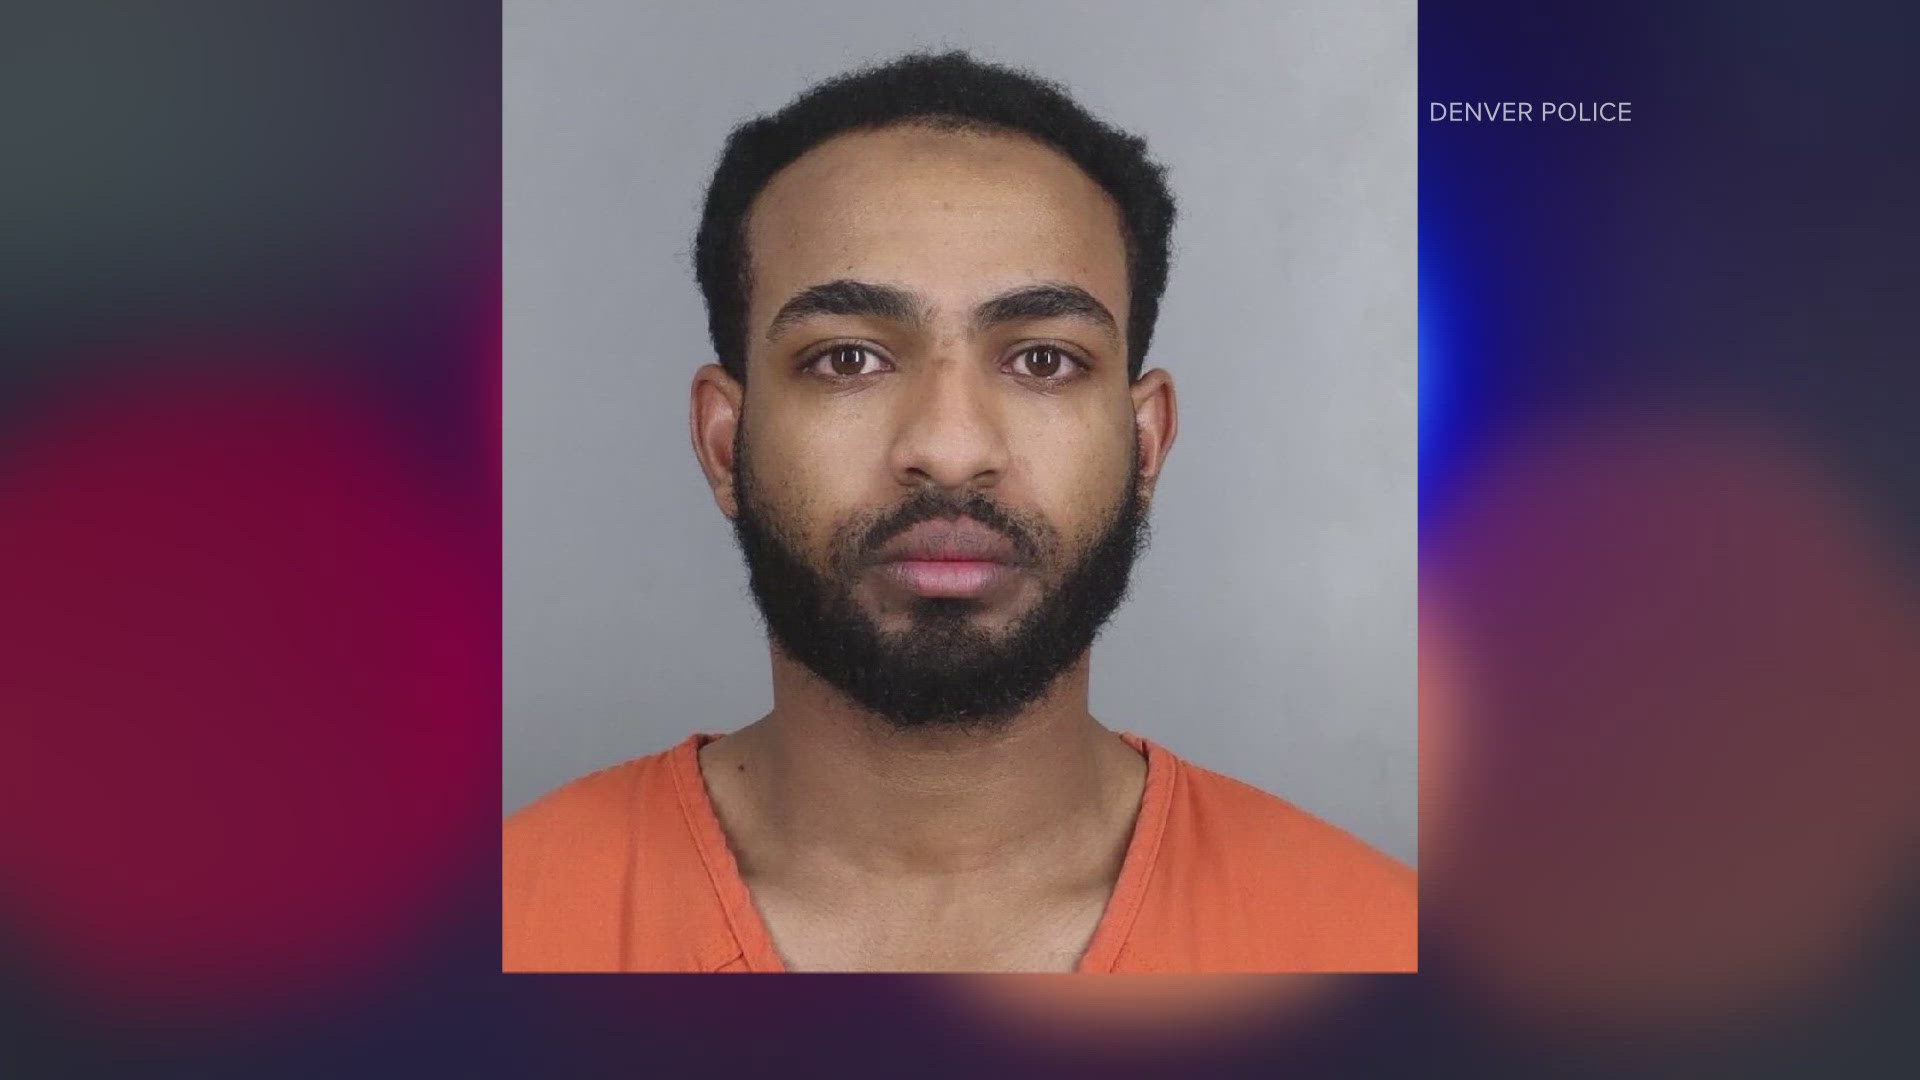 Nesrelah Bedru Kema was arrested in March. Through their investigation, police said they found information indicating there may be more victims.